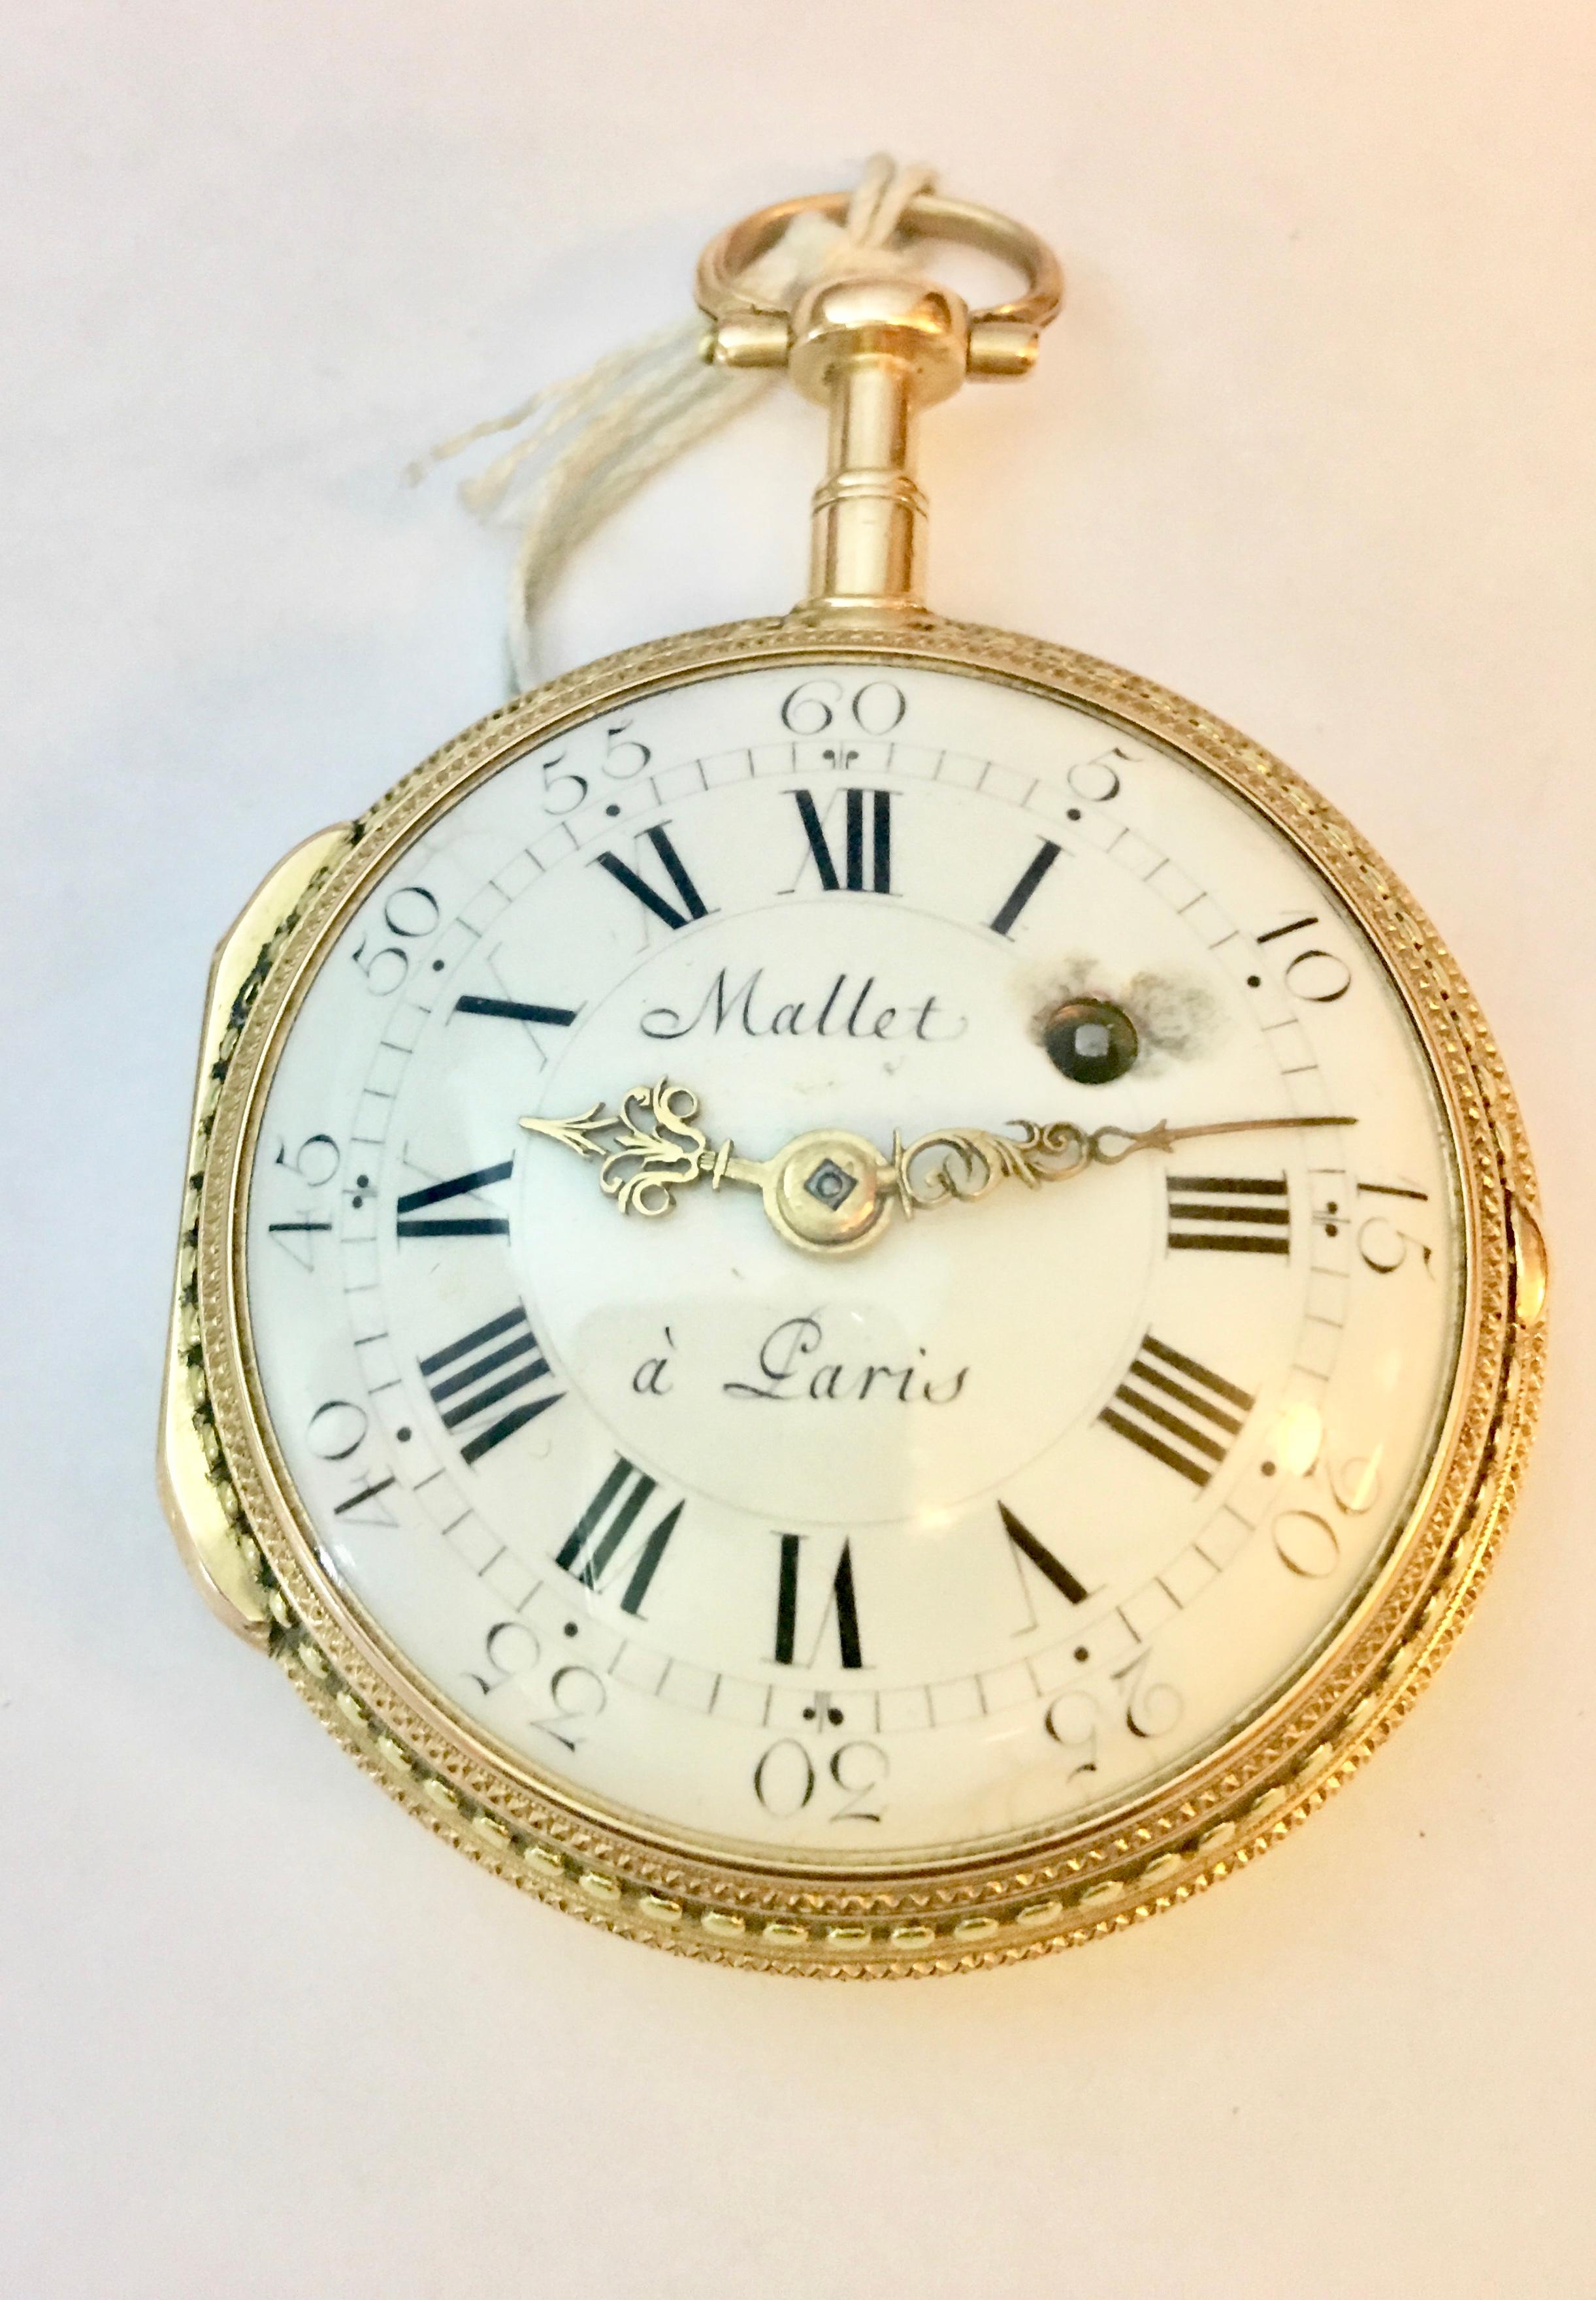 Rare & Early Verge Fusee 18 Karat Tri-Color Gold Pocket Watch by Mallet a Paris For Sale 5